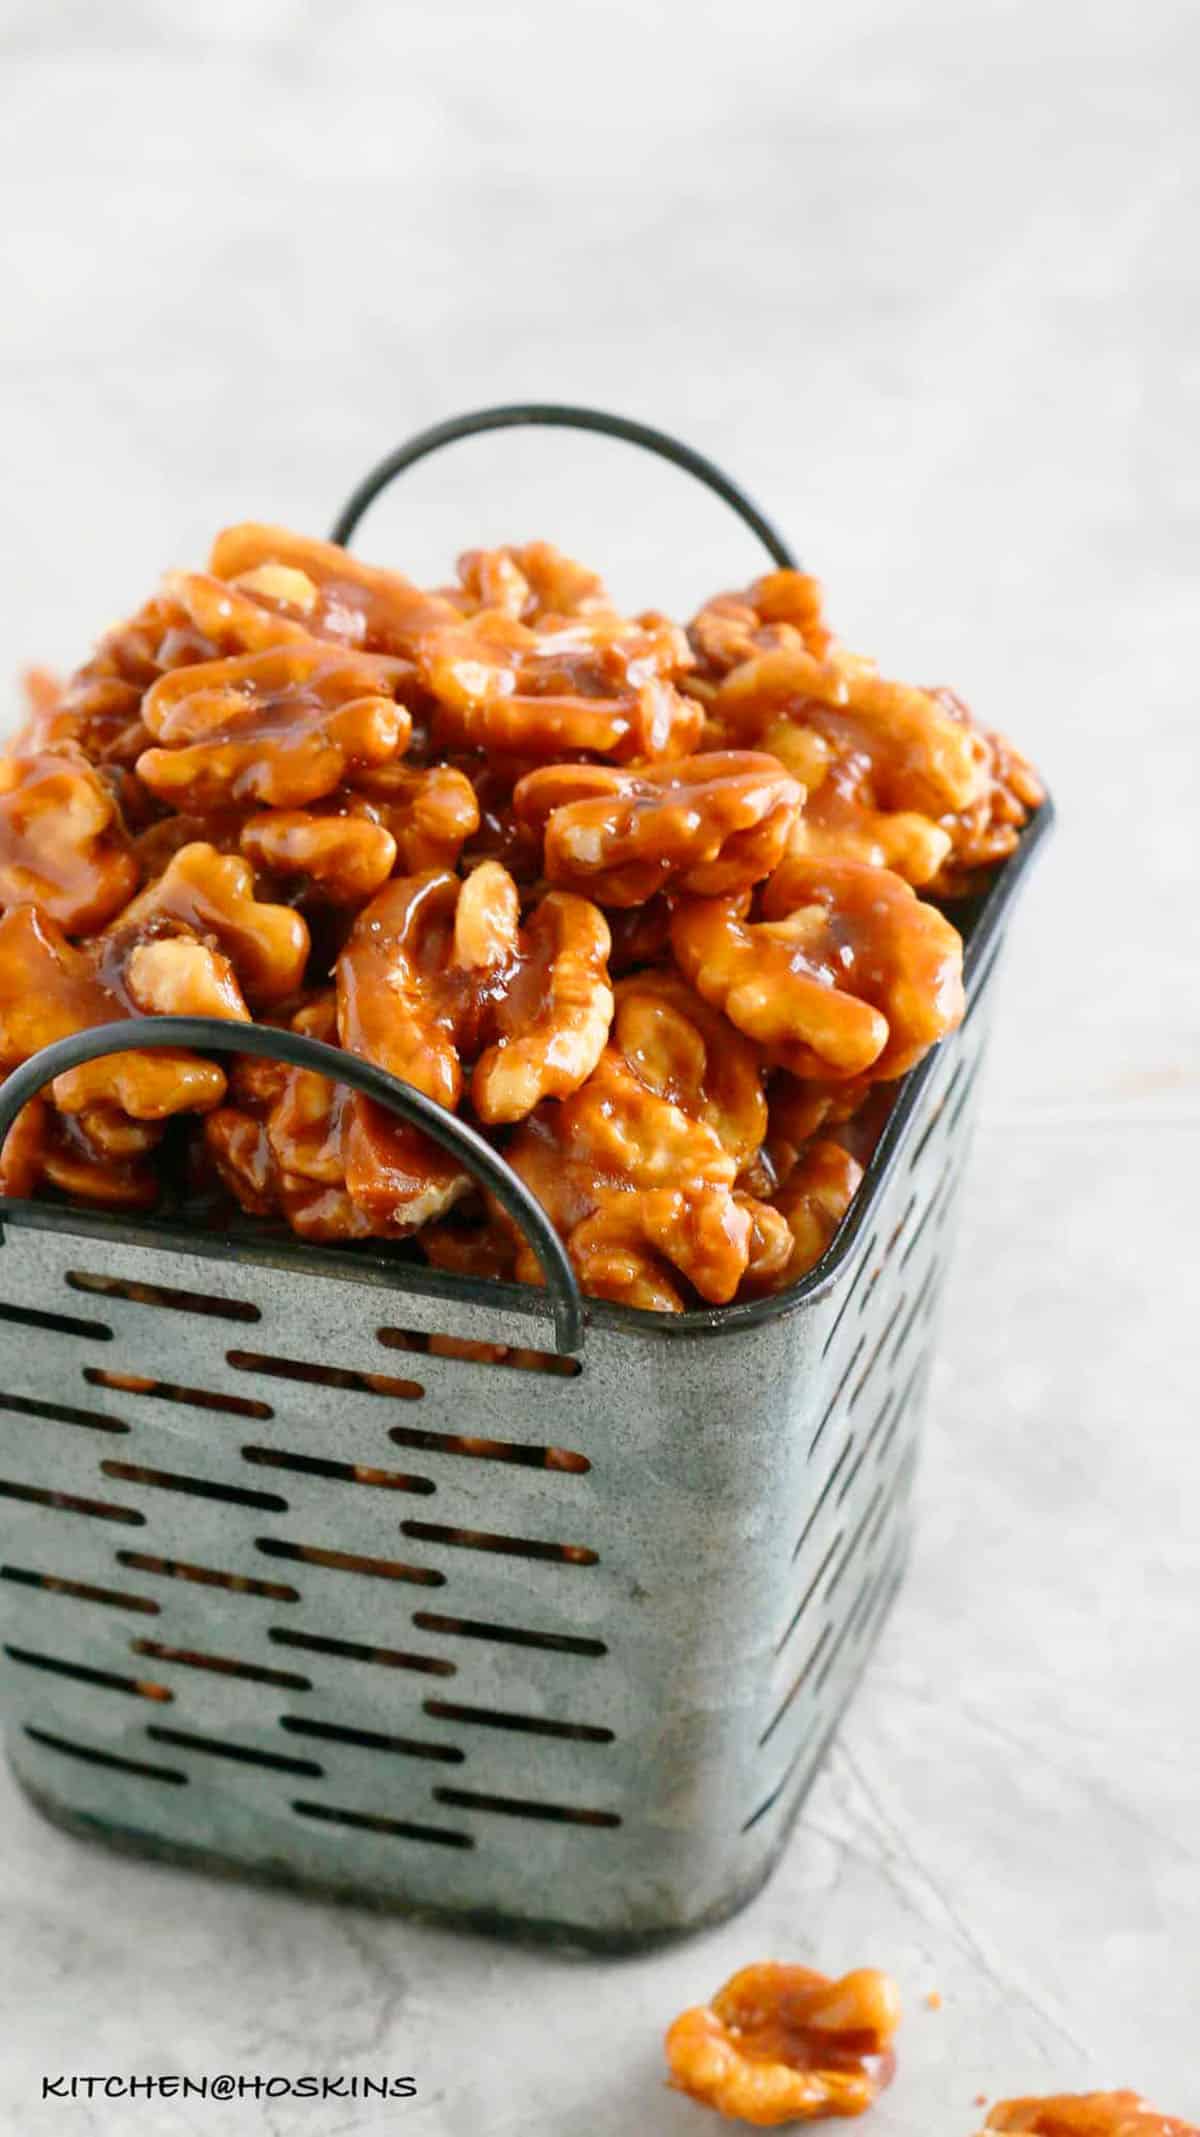 candied walnuts piled high in a grey metal basket.